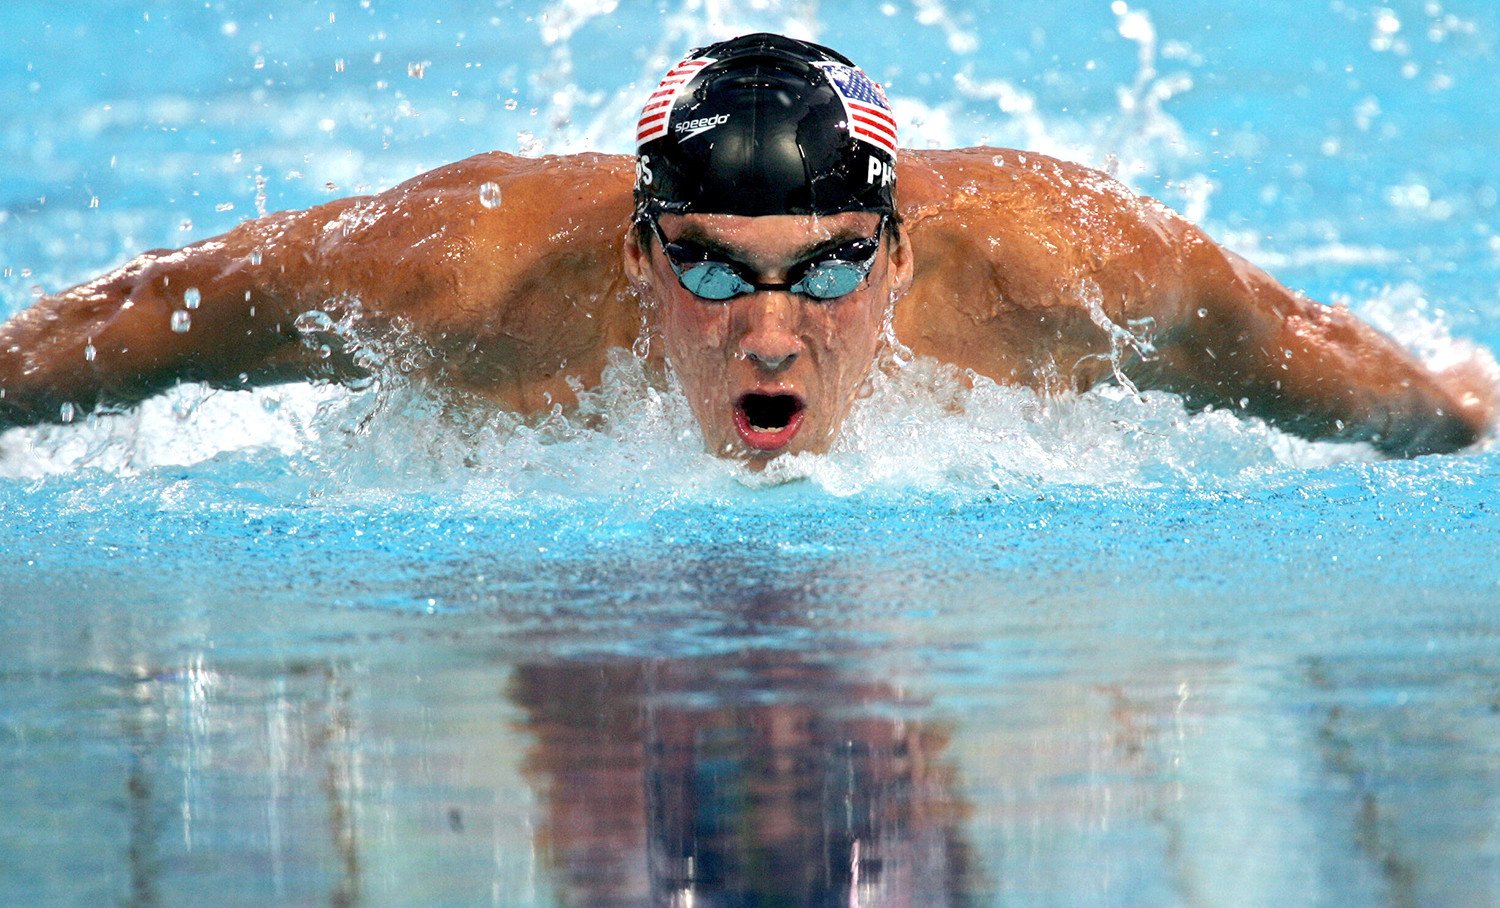 Happy 34th Birthday to the most decorated Olympian of all time, American Swimmer Michael Phelps. 